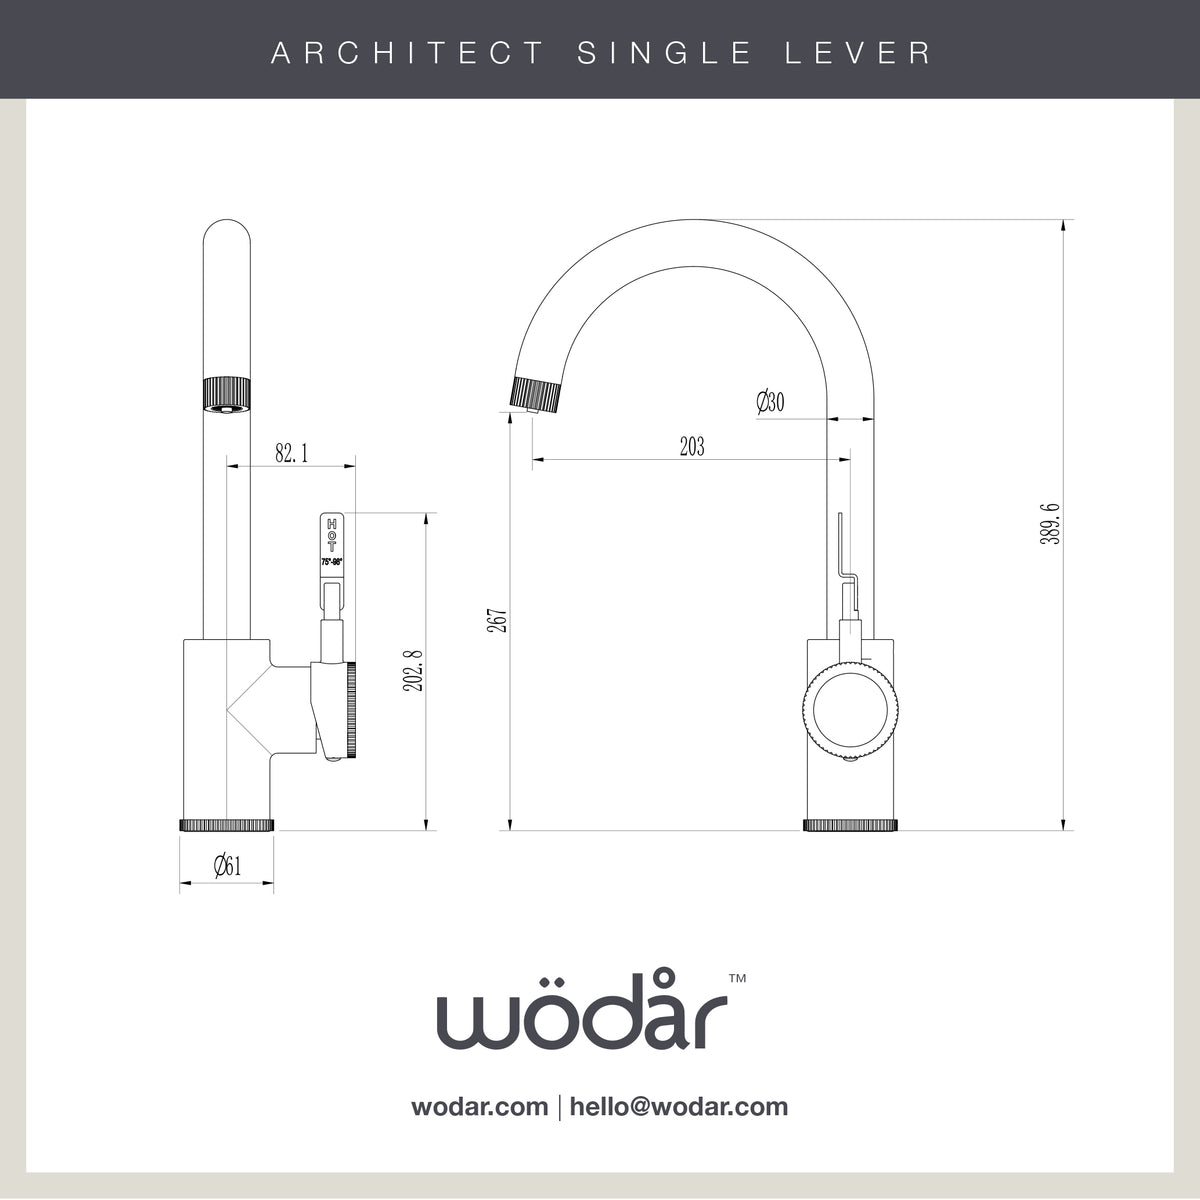 Architect Single Lever 3 in 1 Black Boiling Hot Water Tap